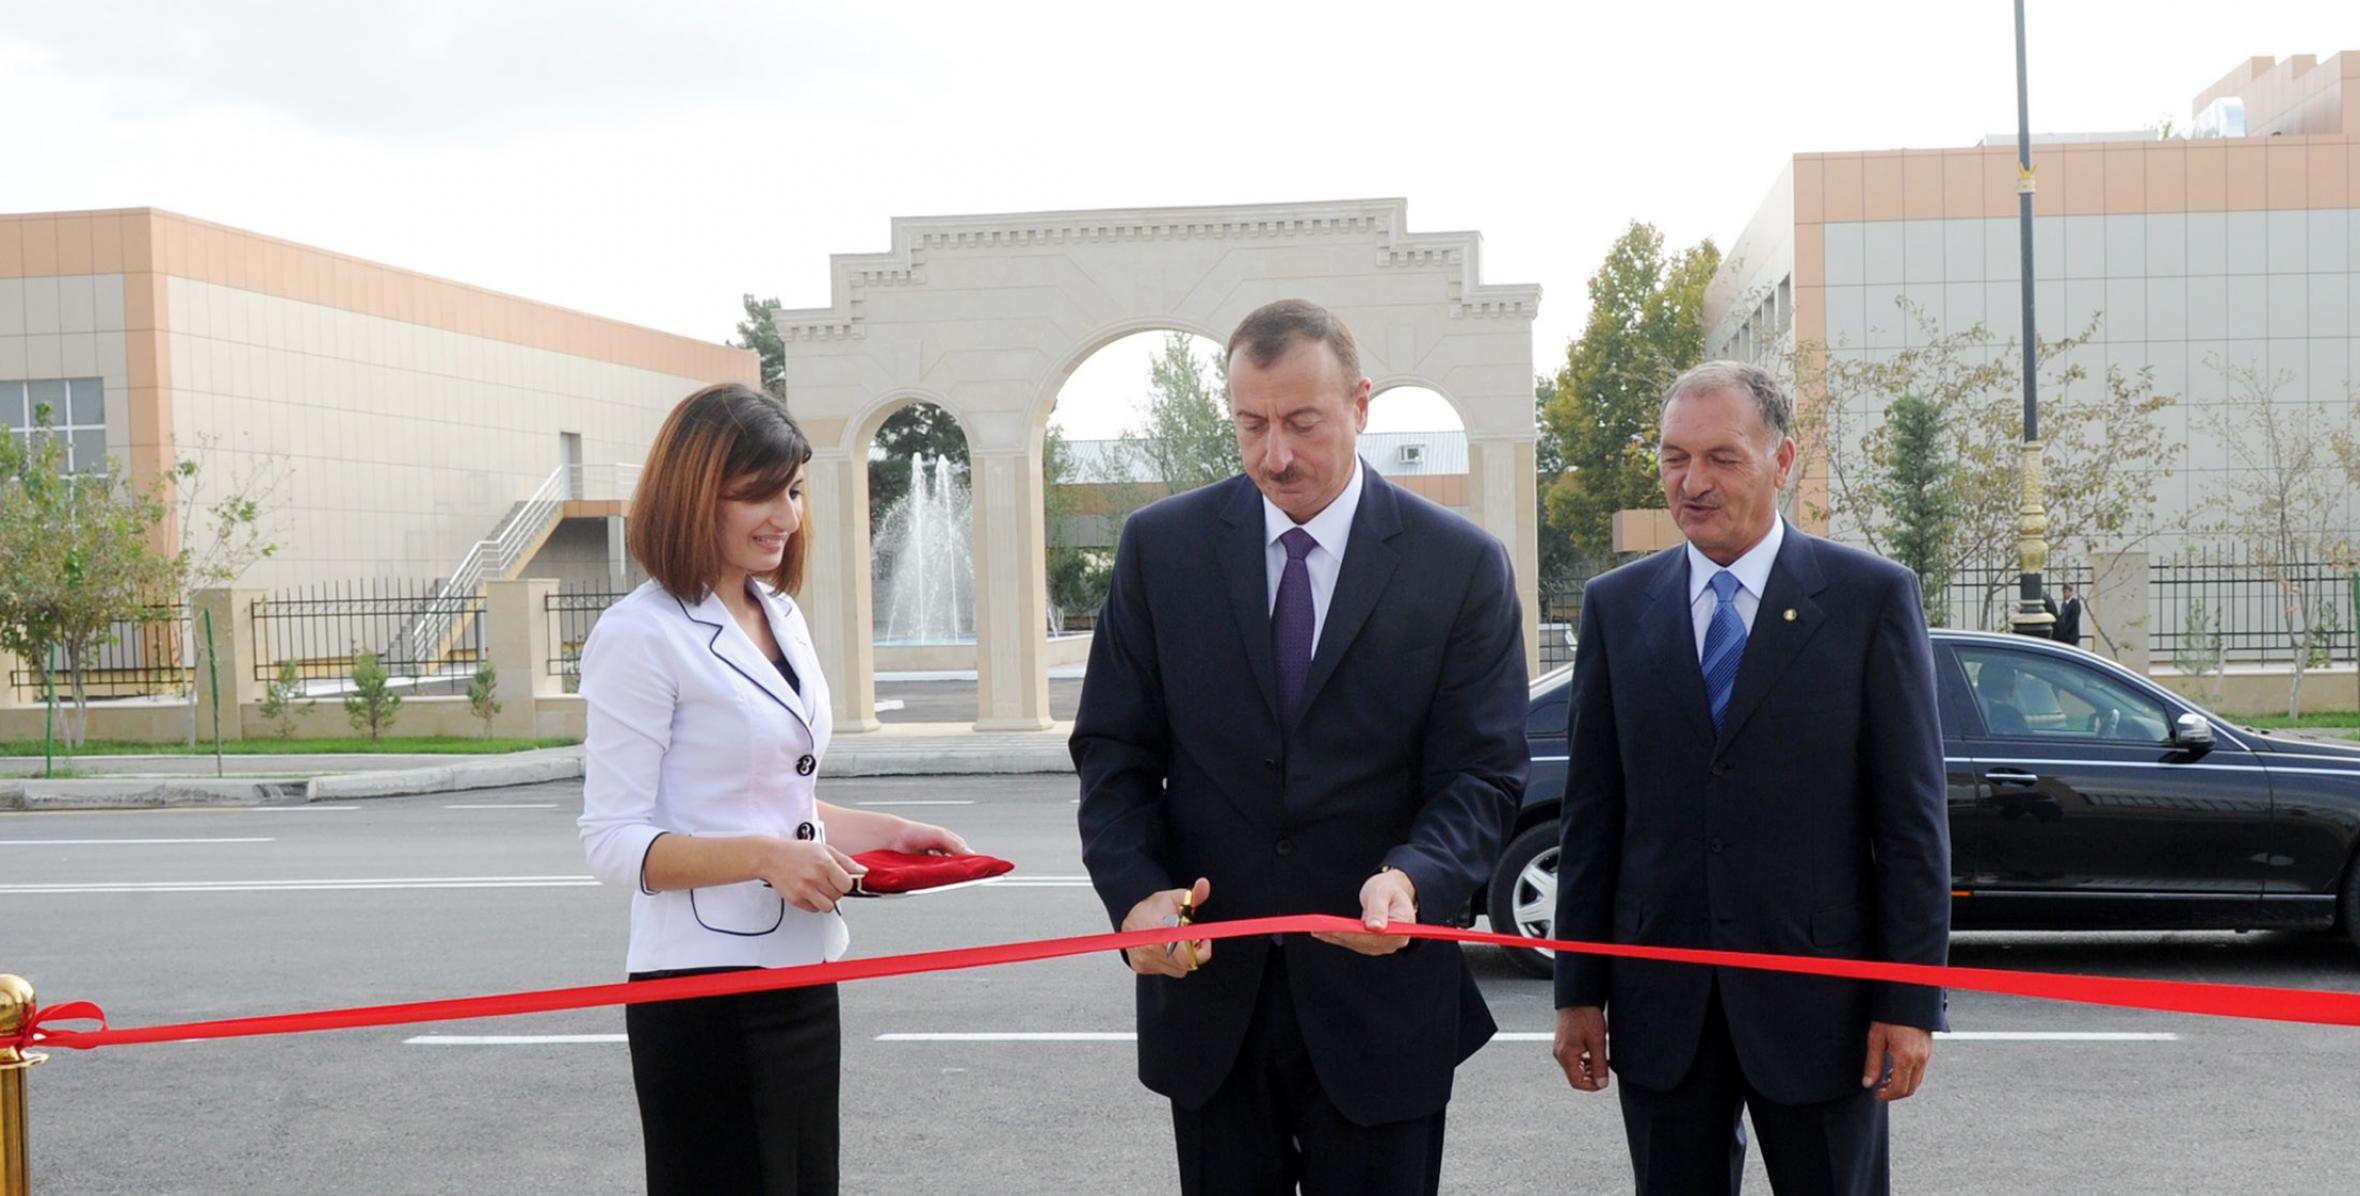 Ilham Aliyev attended the opening of the Samad Vurgun culture and recreation park in Yevlakh